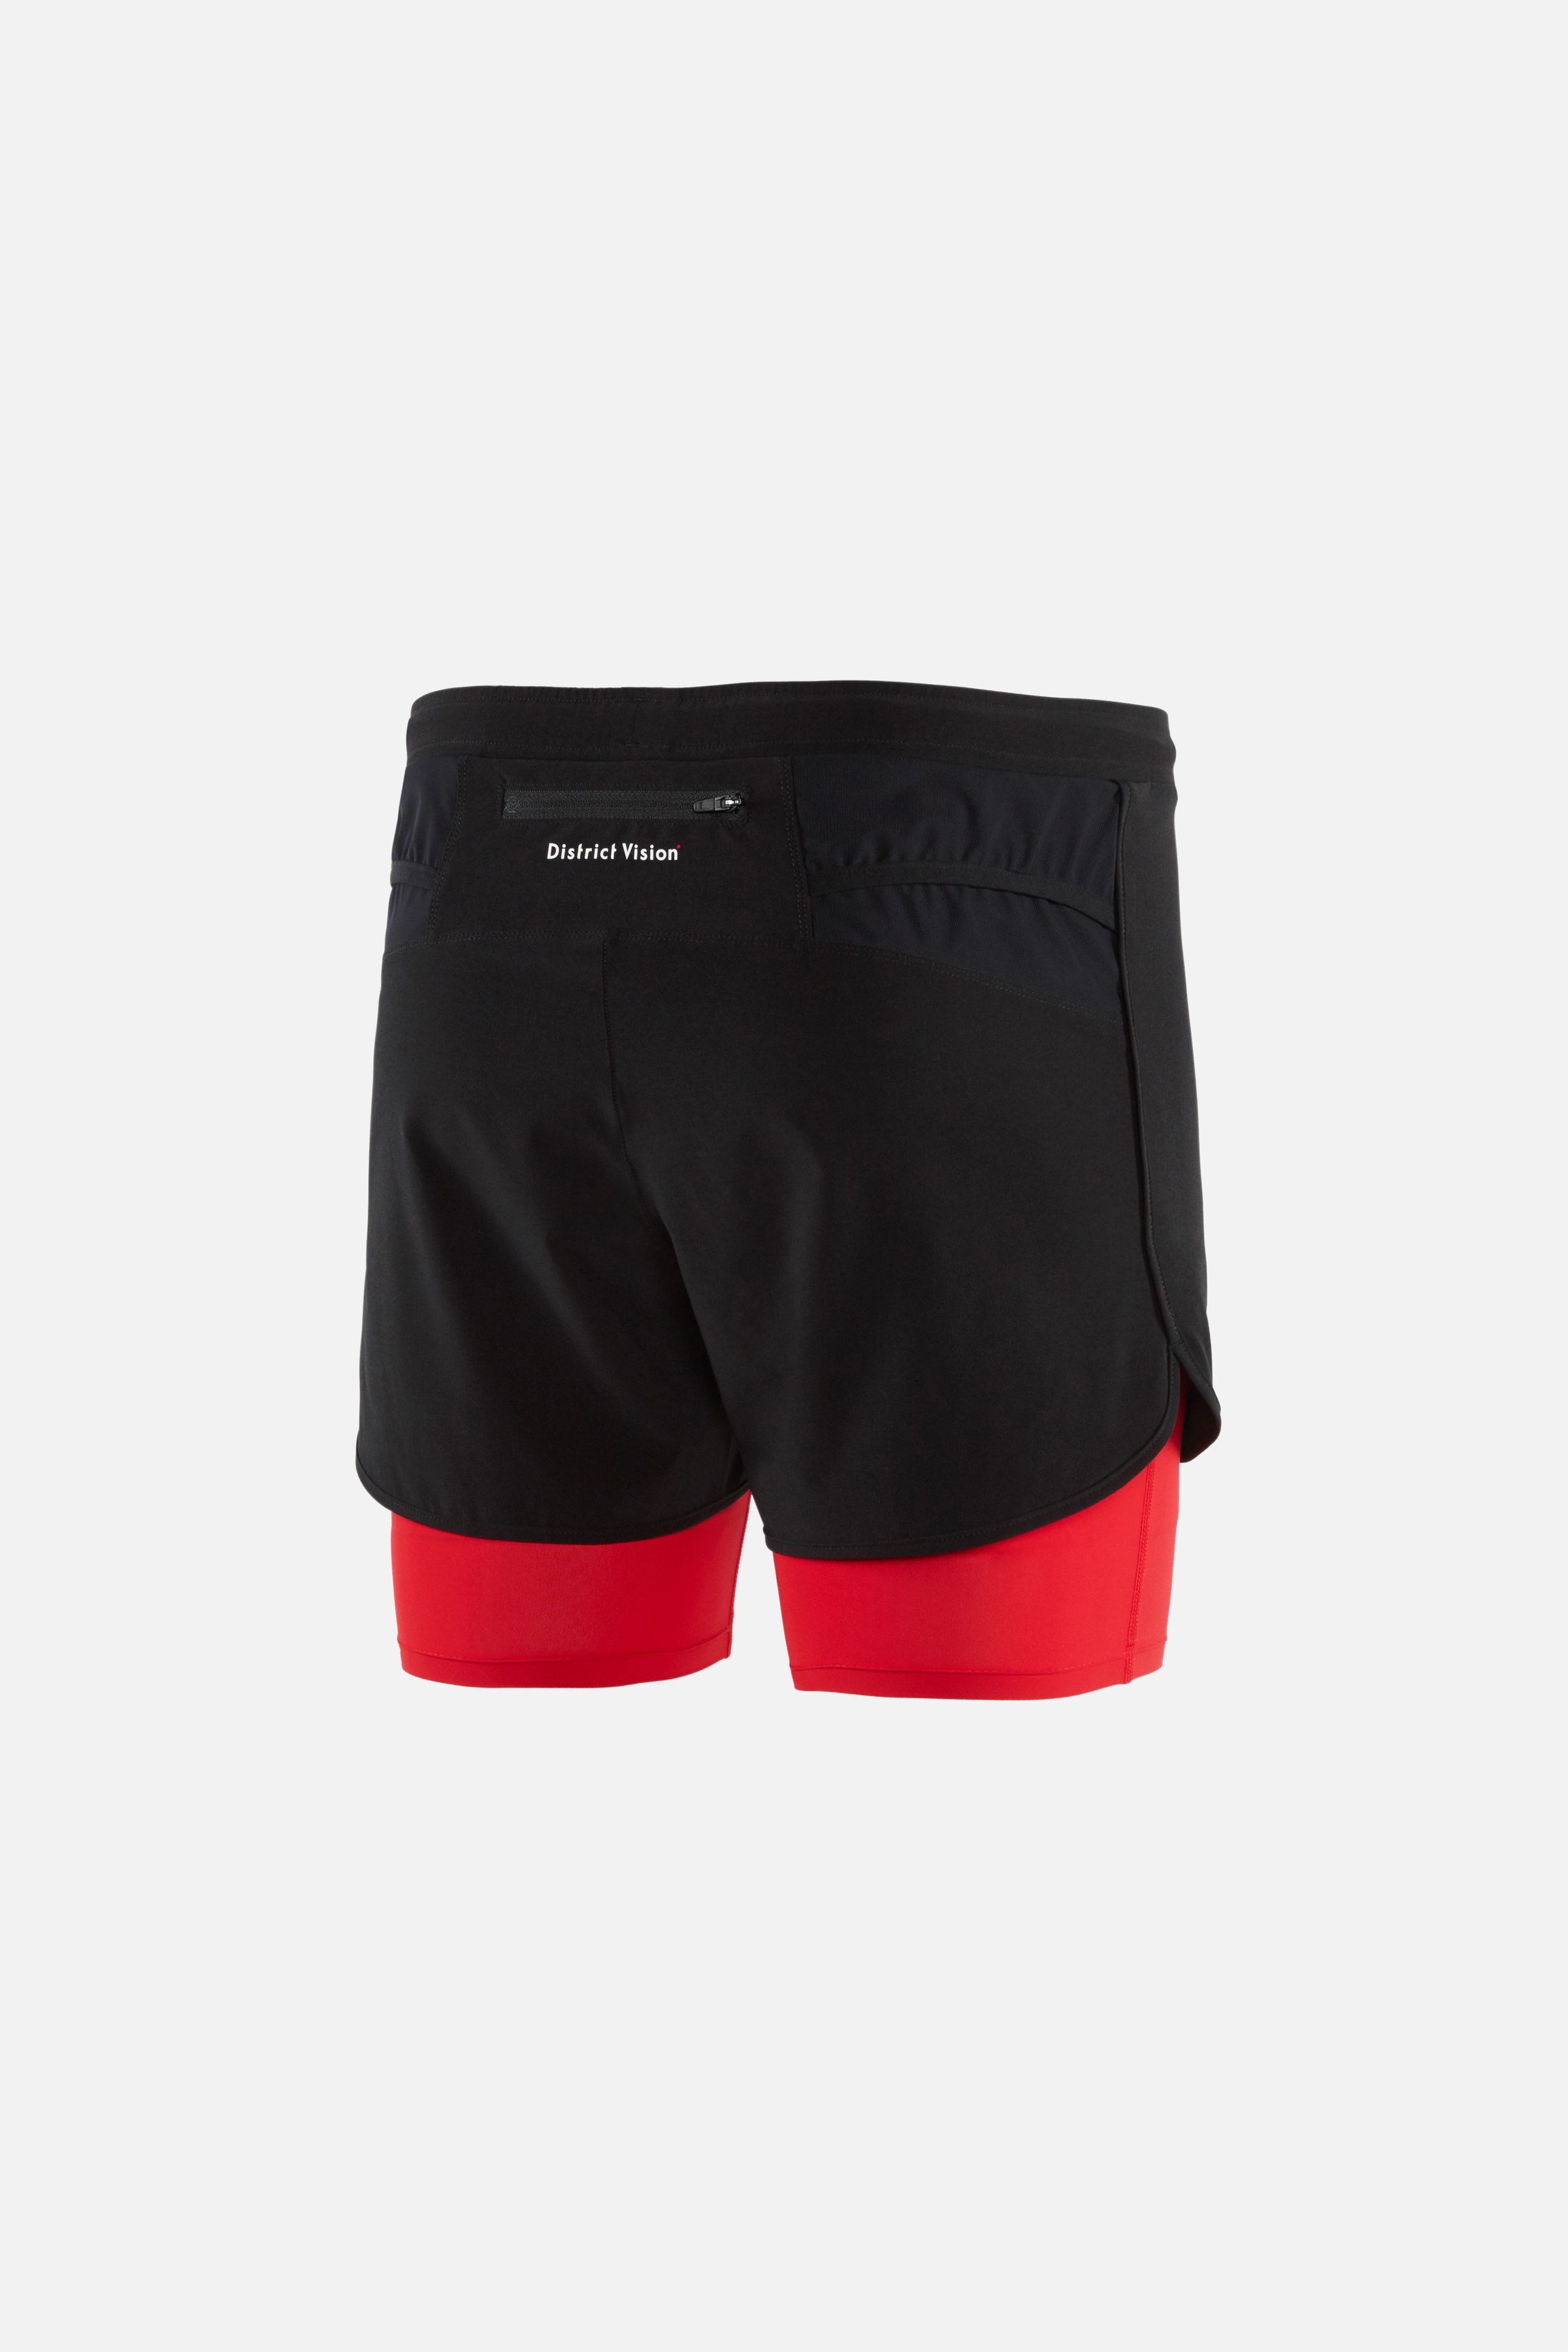 Aaron Layered Shorts, Black/Red — District Vision